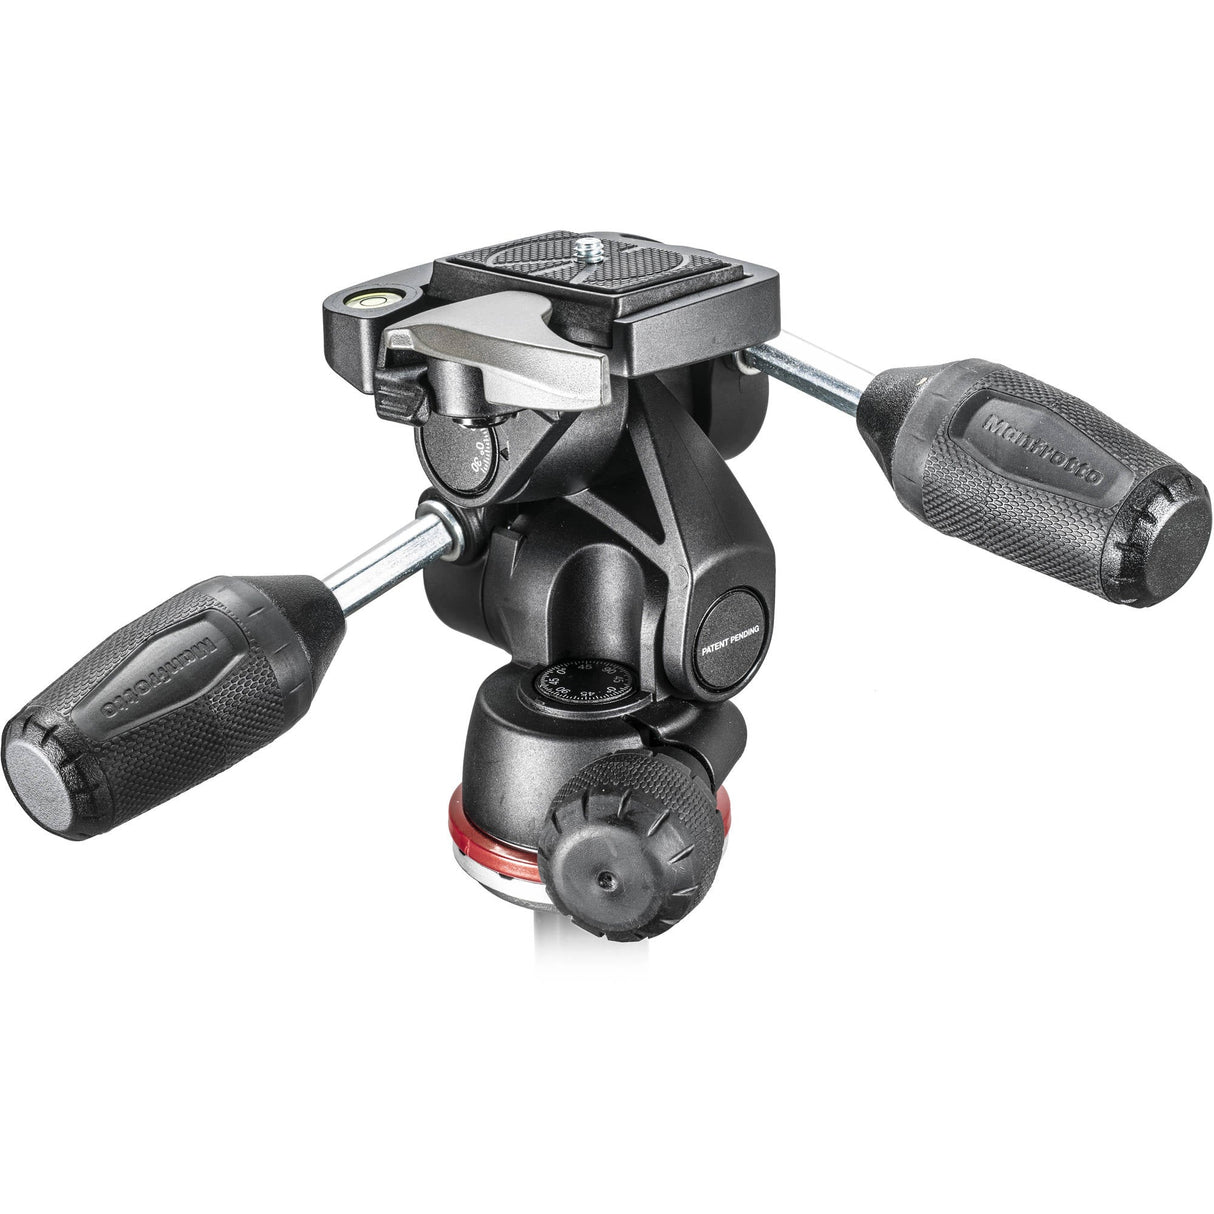 Manfrotto MH804 3-Way, Pan-and-Tilt Head with 200LT-PL Quick Release Plate